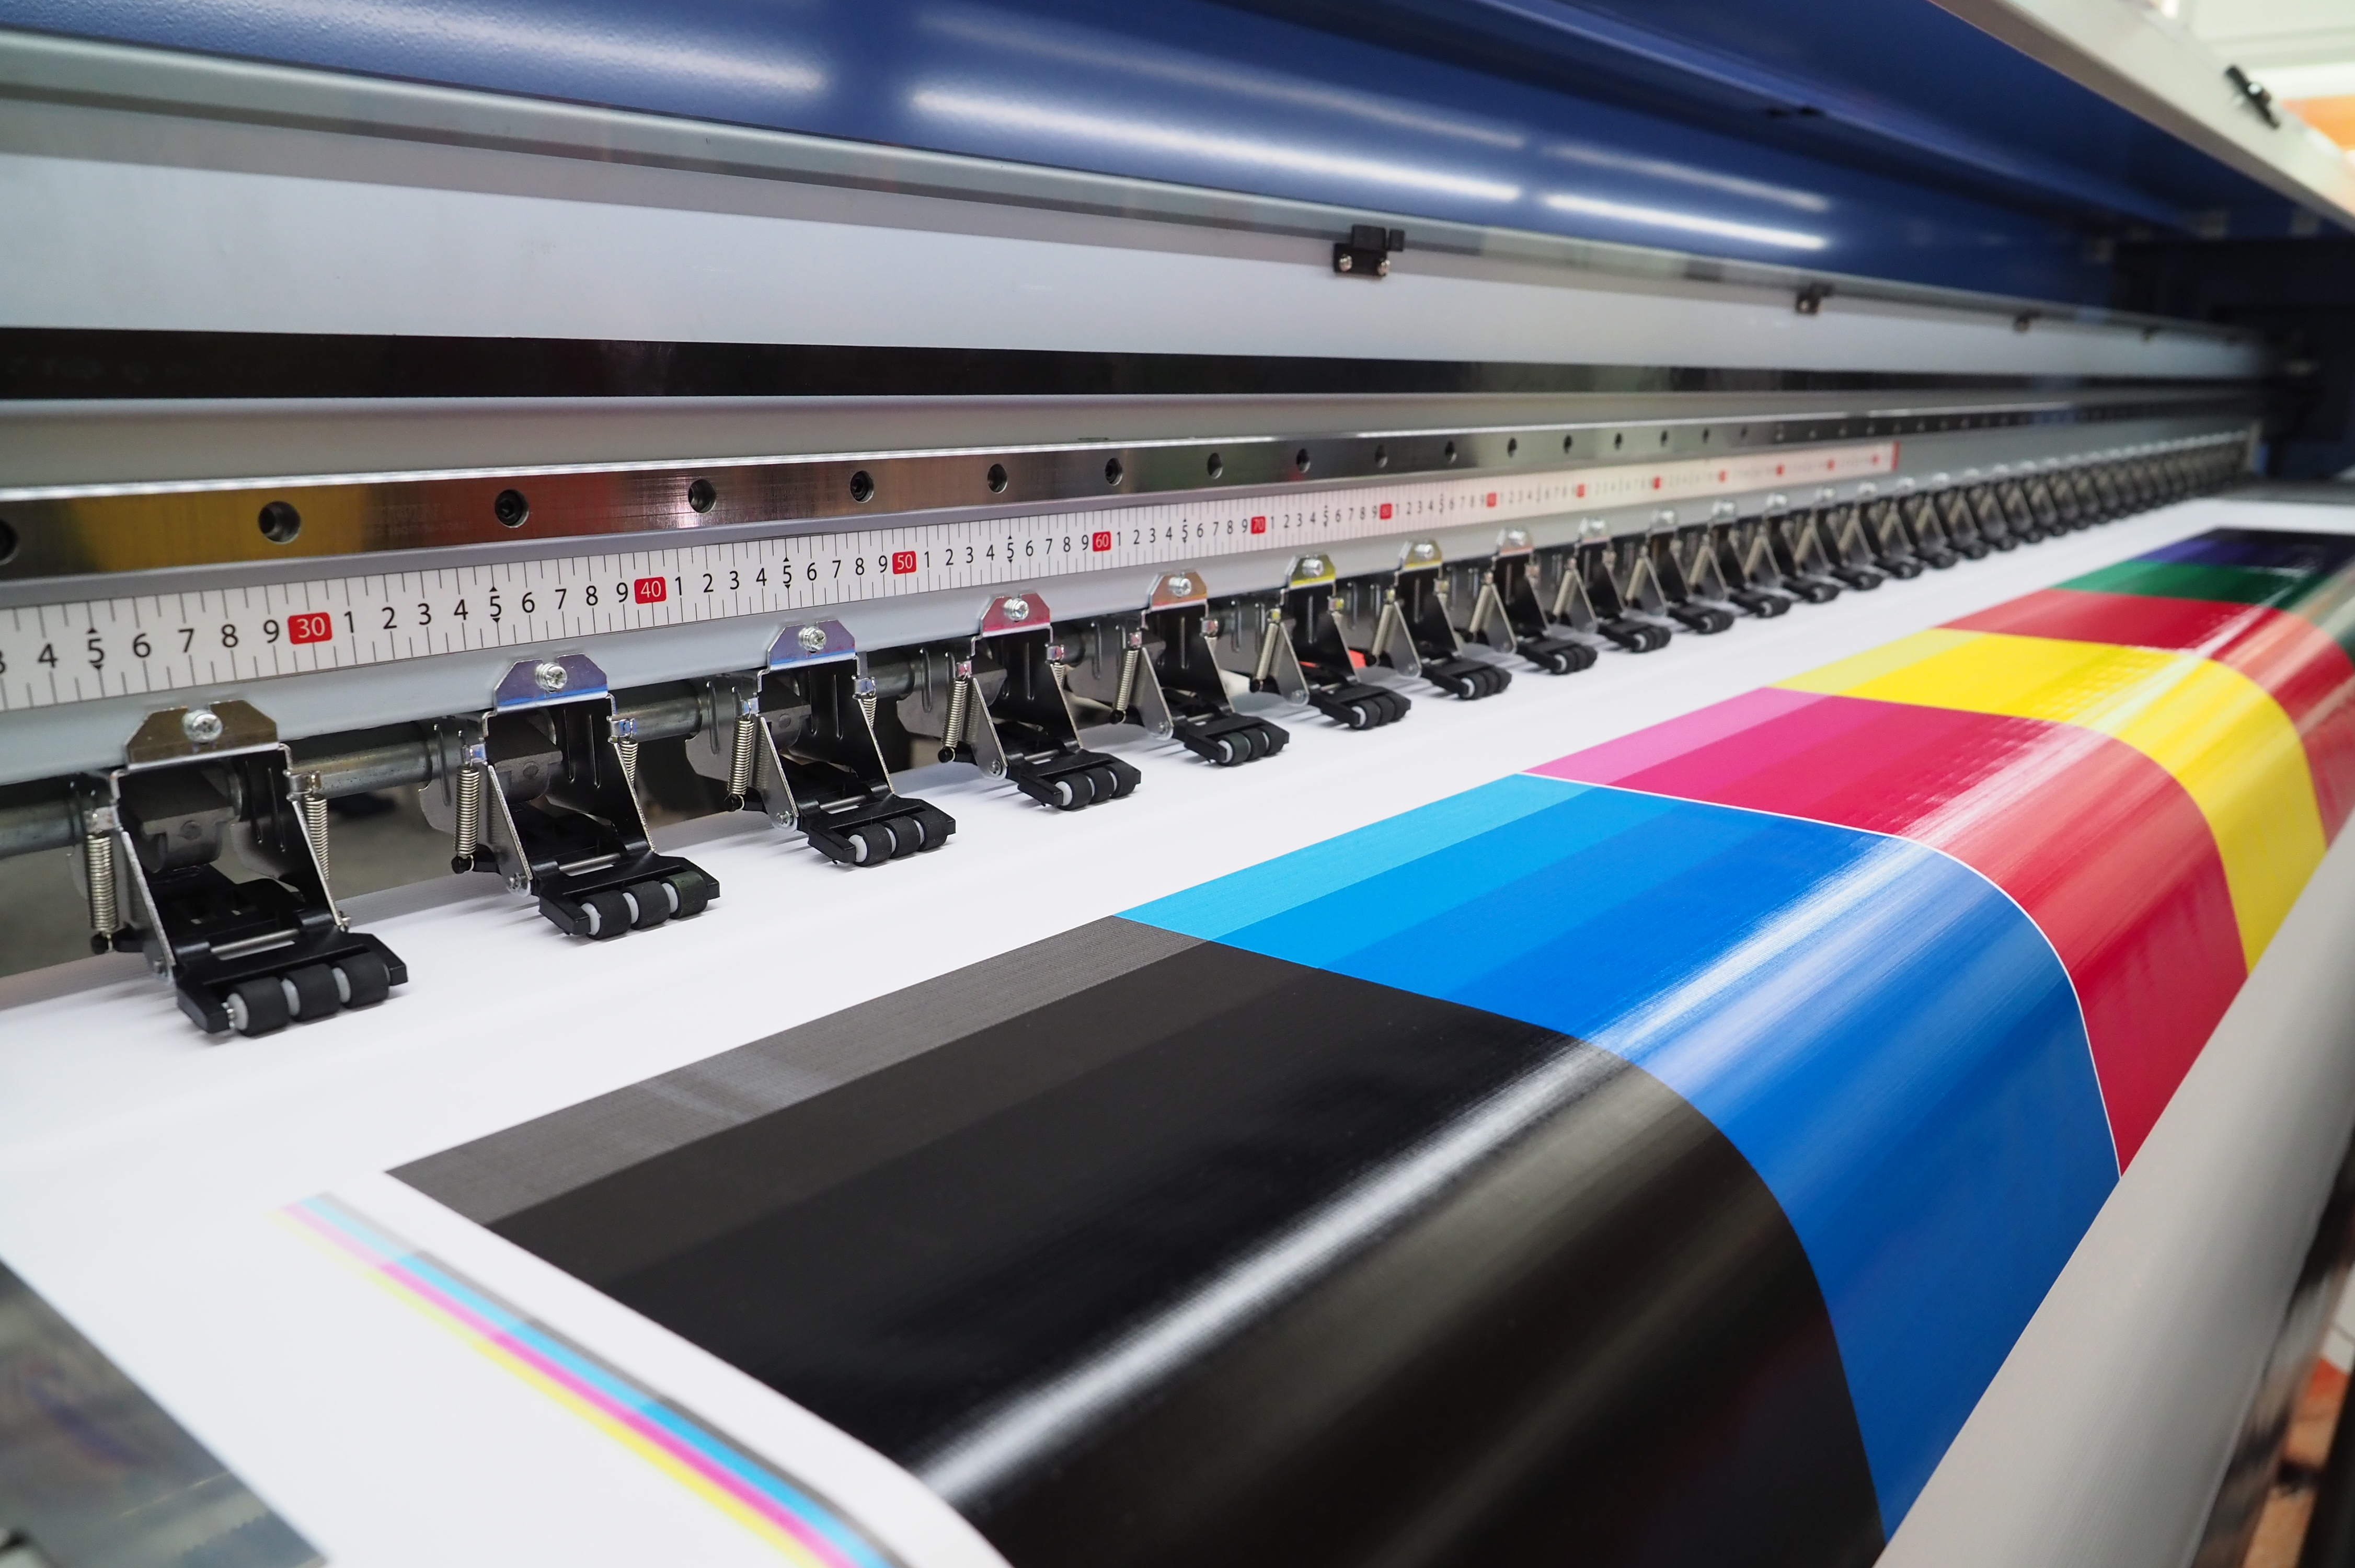 The importance of standards for print production